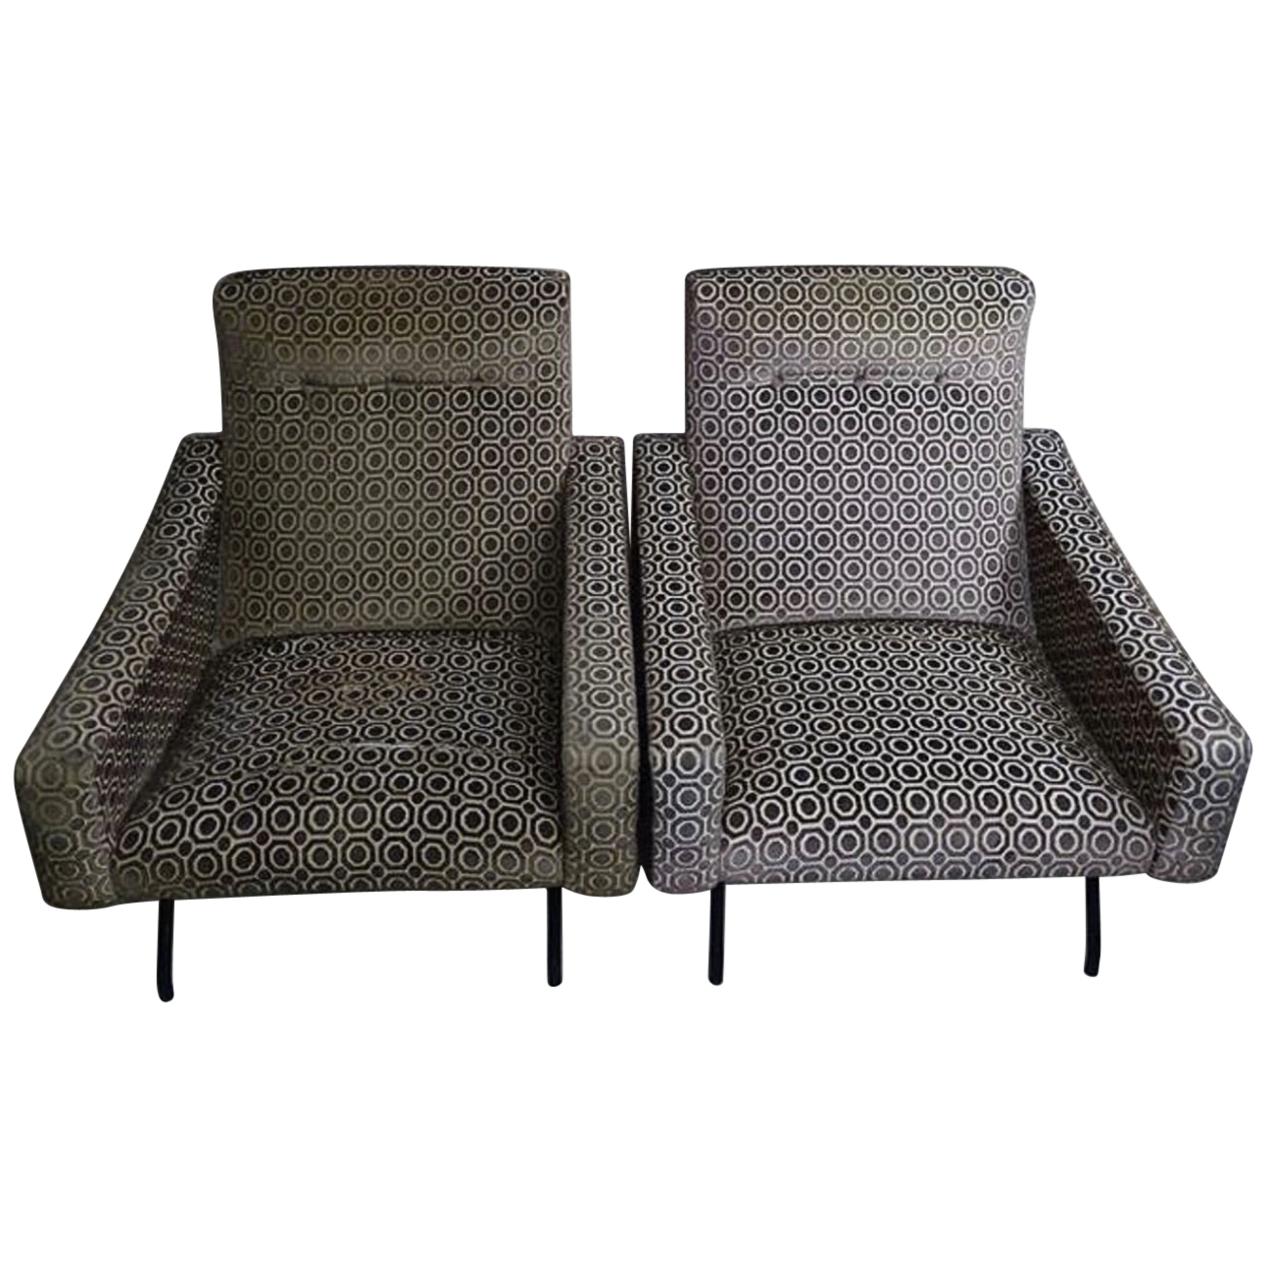 Pair of Joseph Andre Motte armchairs, Steiner Edition, France, 1955 For Sale